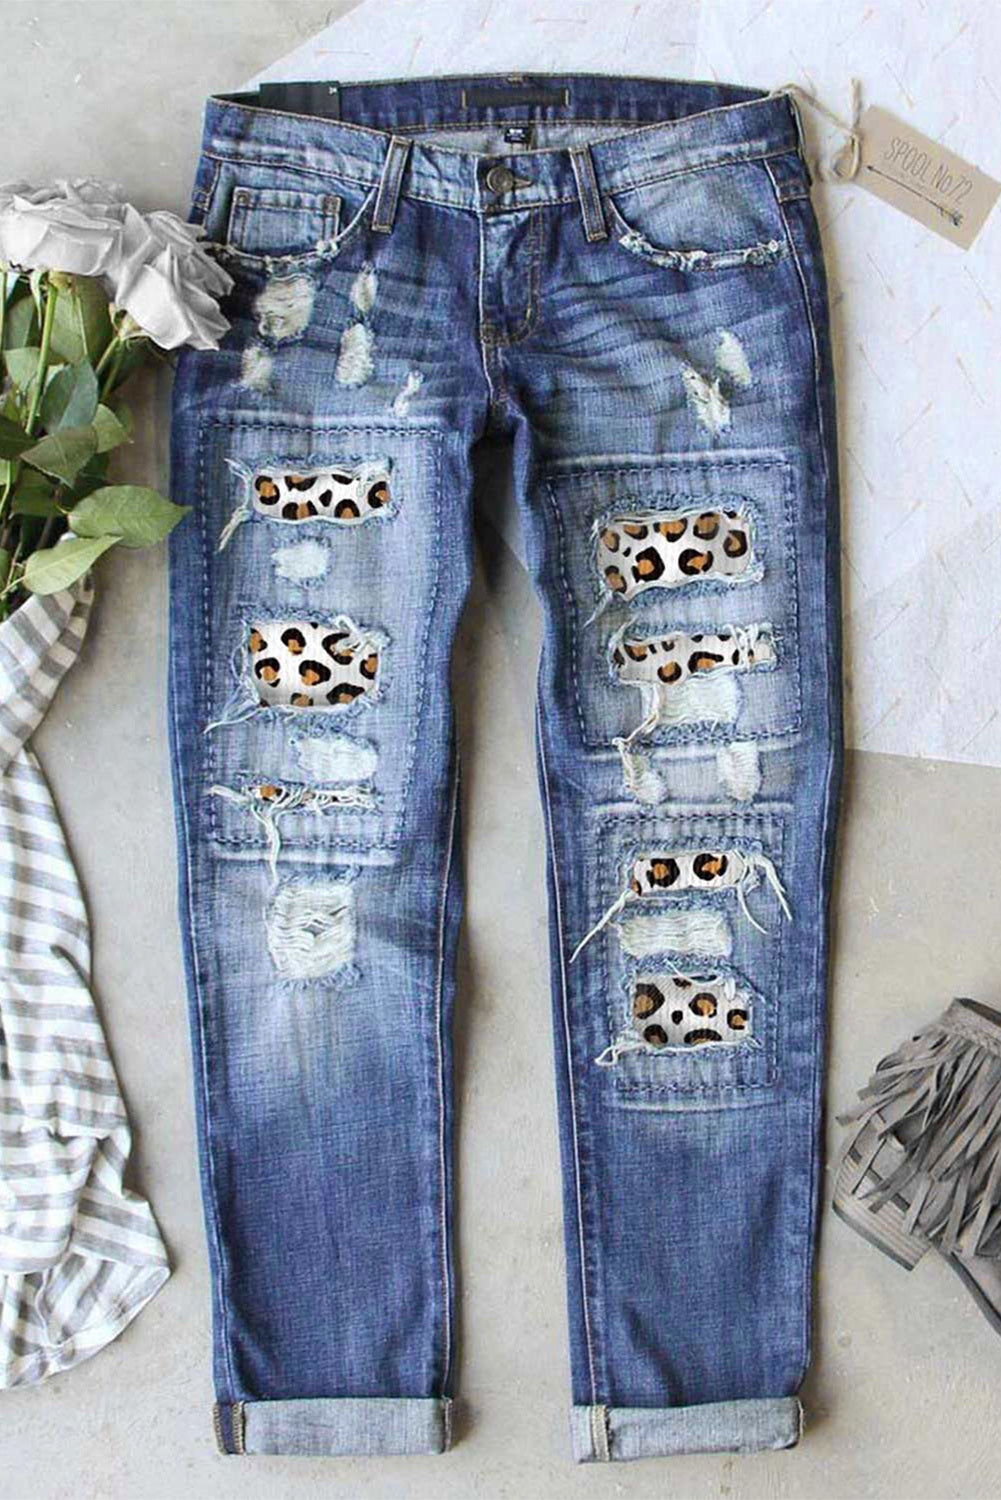 Sky Blue Women's Leopard Print Ripped Patchwork Destroyed Skinny Jeans Denim Pants LC78976-4